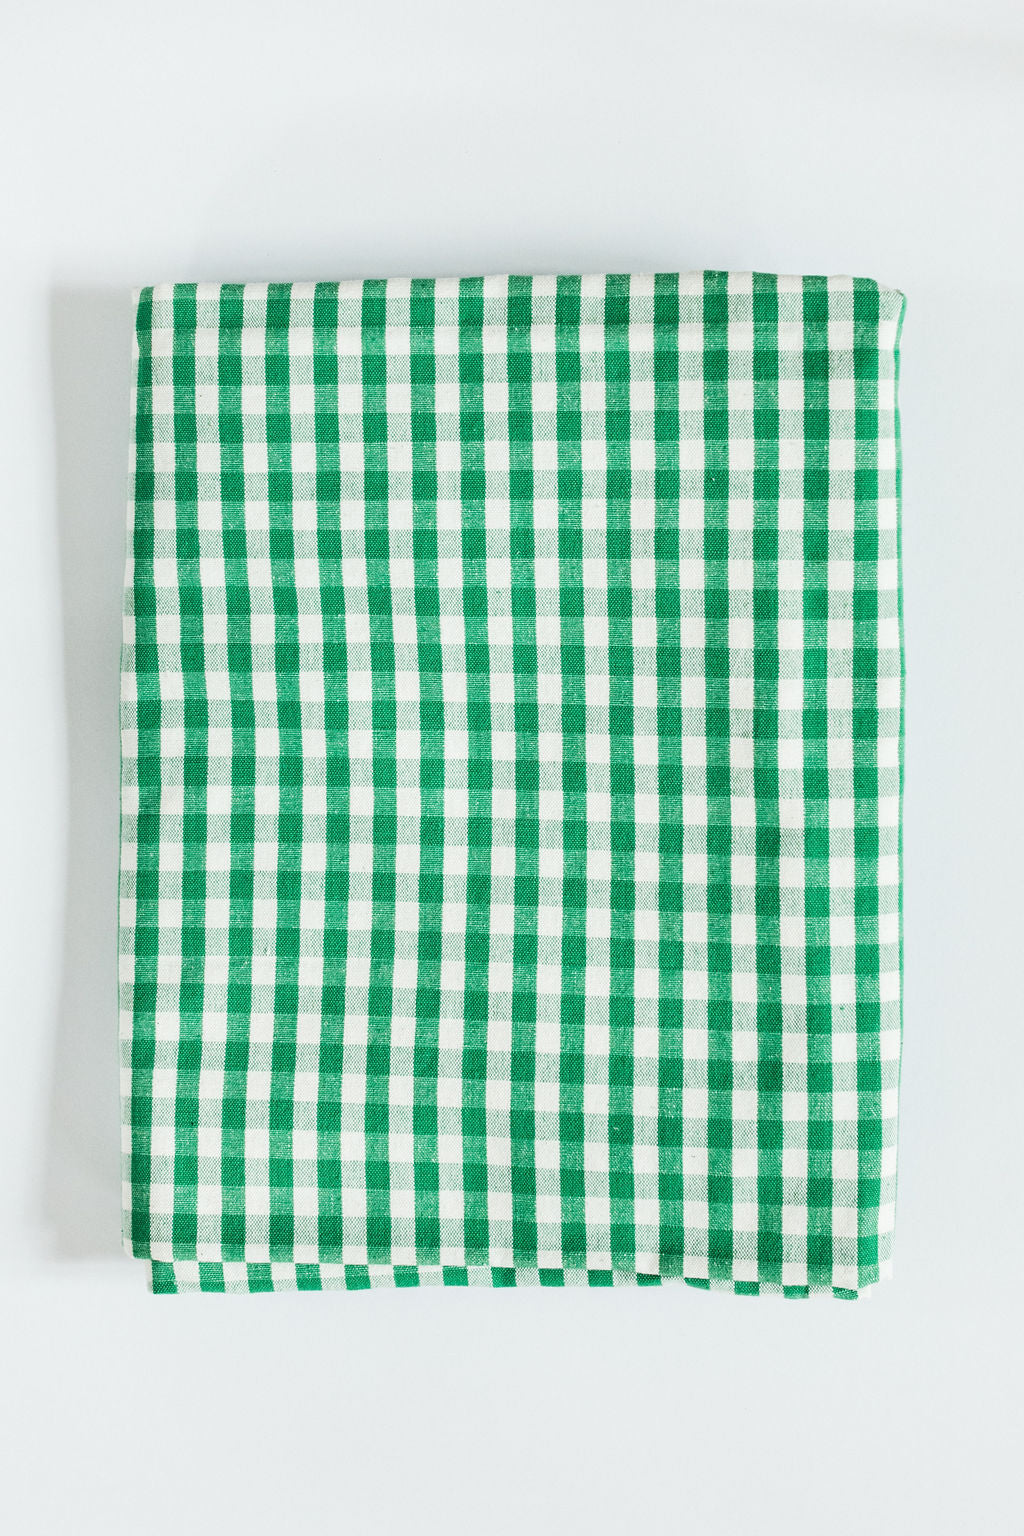 Gingham Check Green Table Cloth